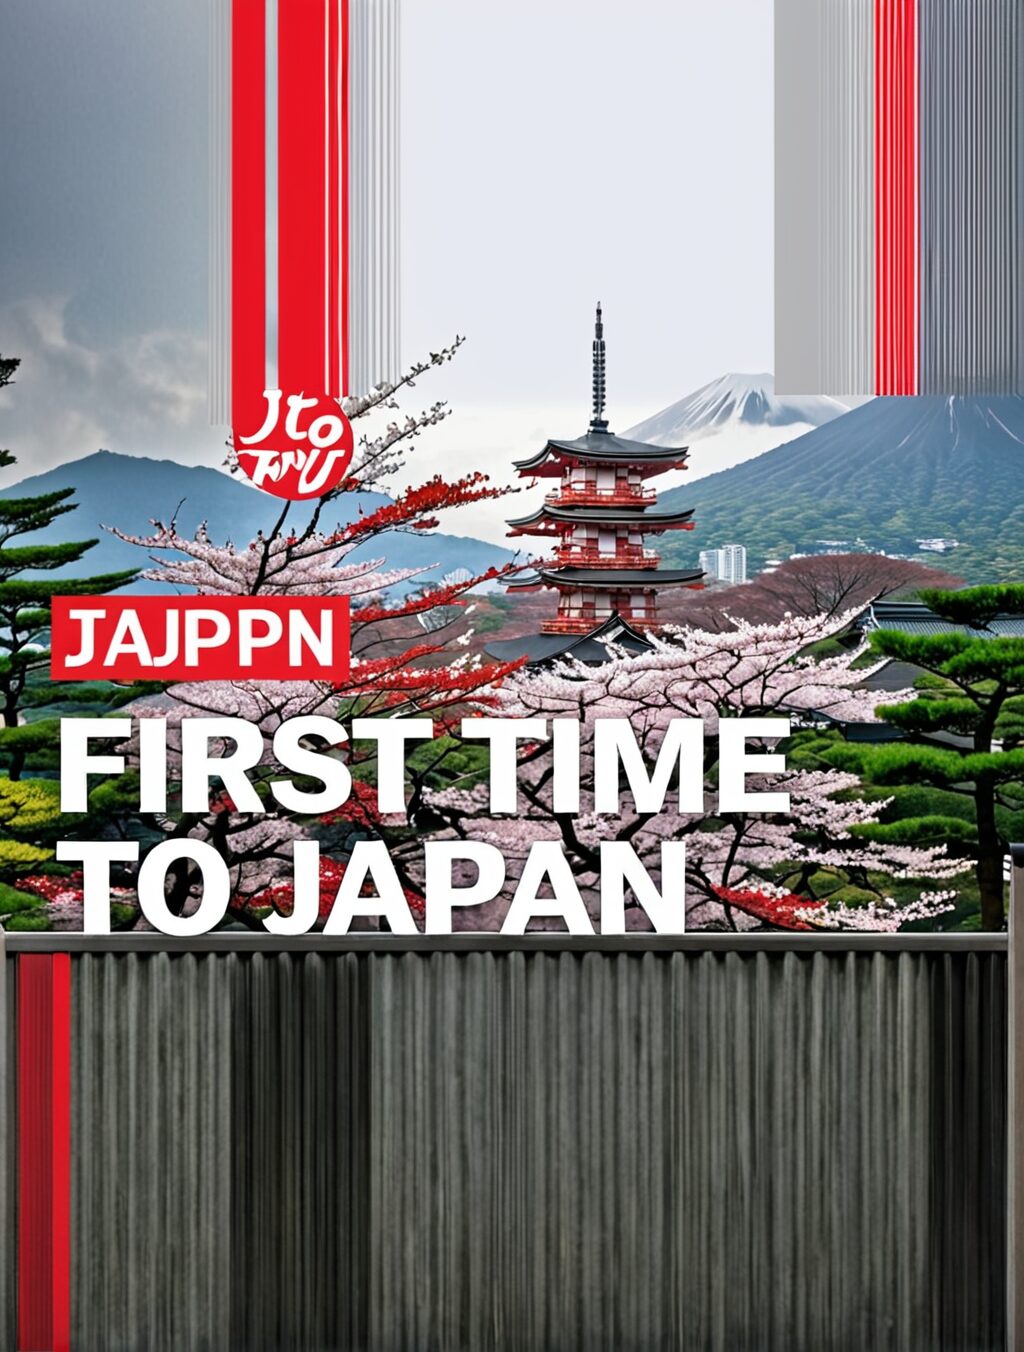 traveling to japan for the first time